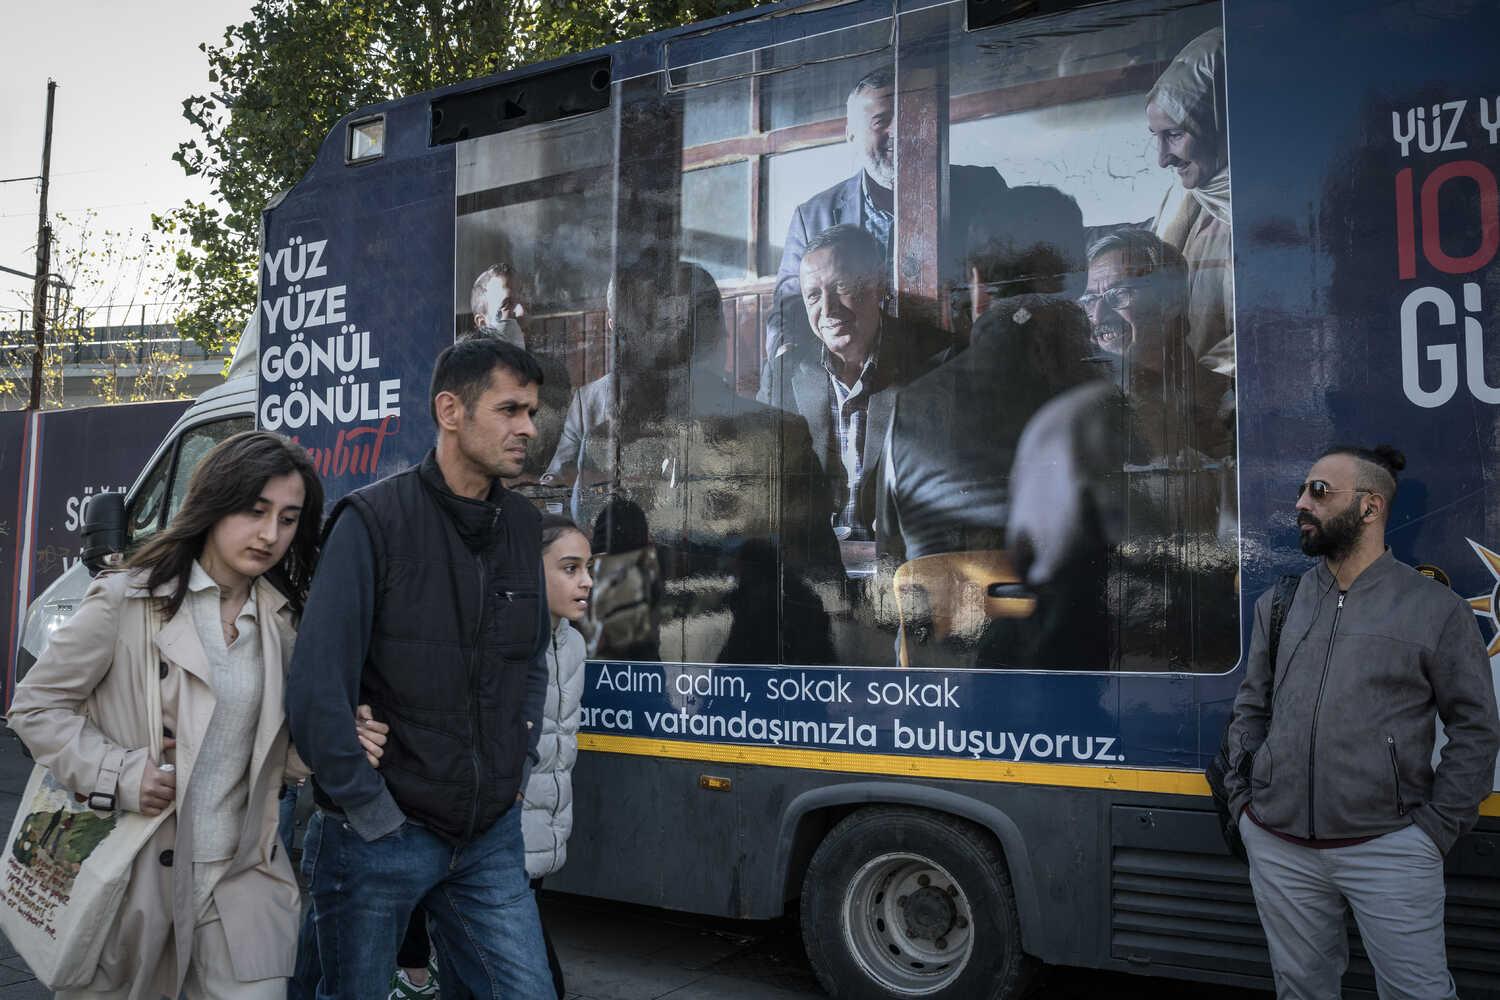 A campaign van for President Recep Tayyip Erdogan’s governing Justice and Development Party in Istanbul in November. He has been Turkey’s paramount politician for two decades.